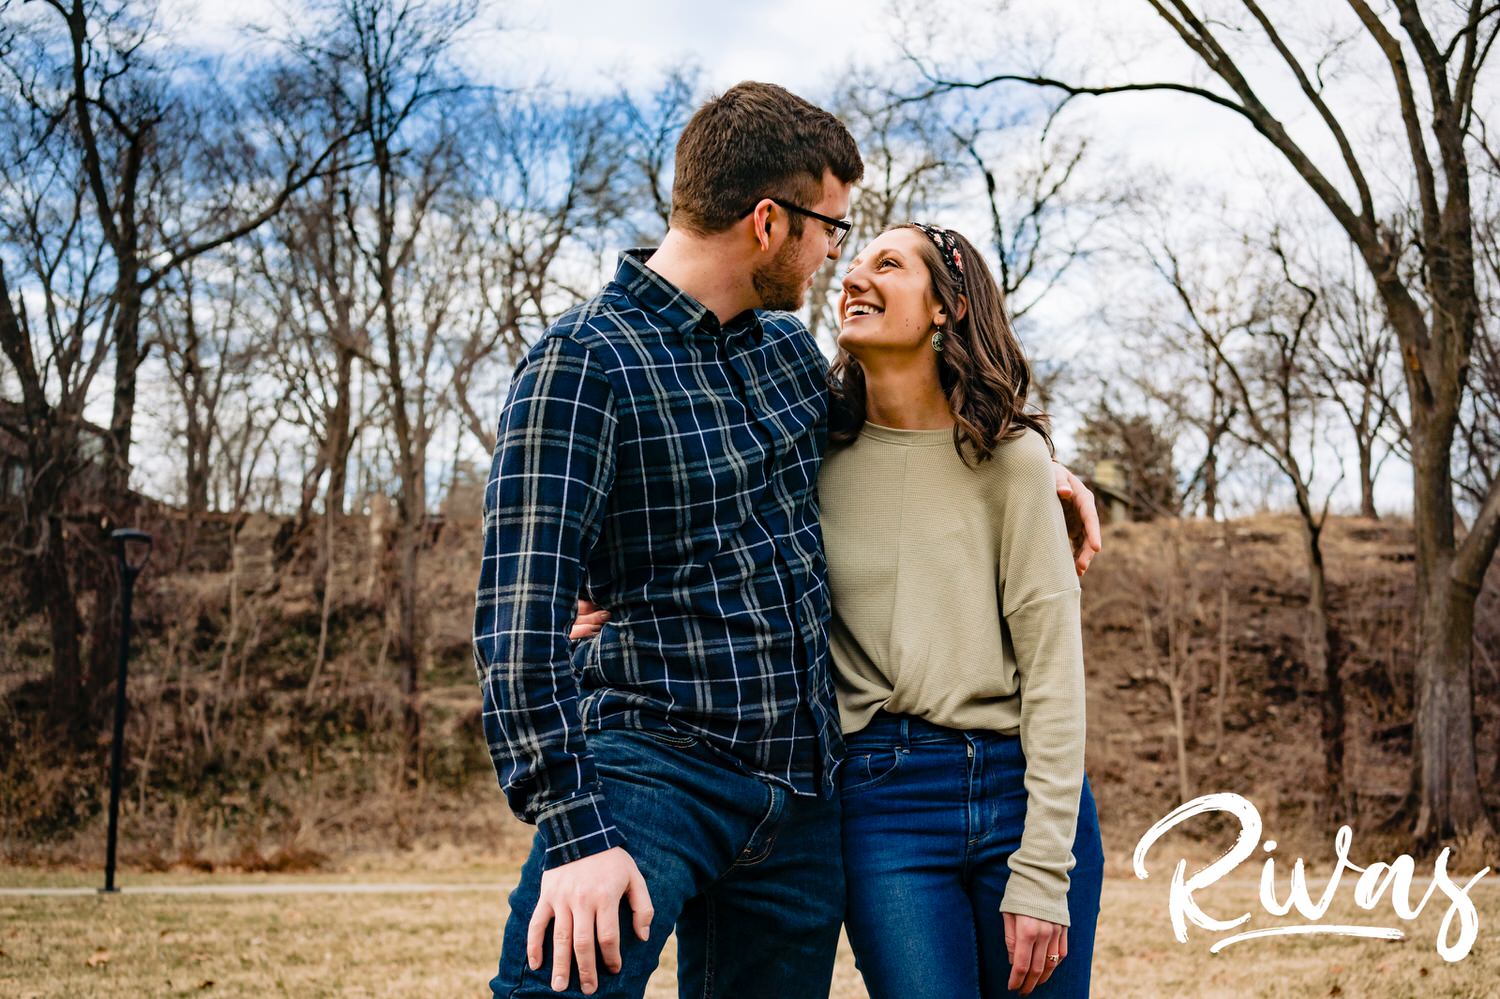 A colorful, candid picture of an engaged couple sharing an embrace during their winter engagement session. 